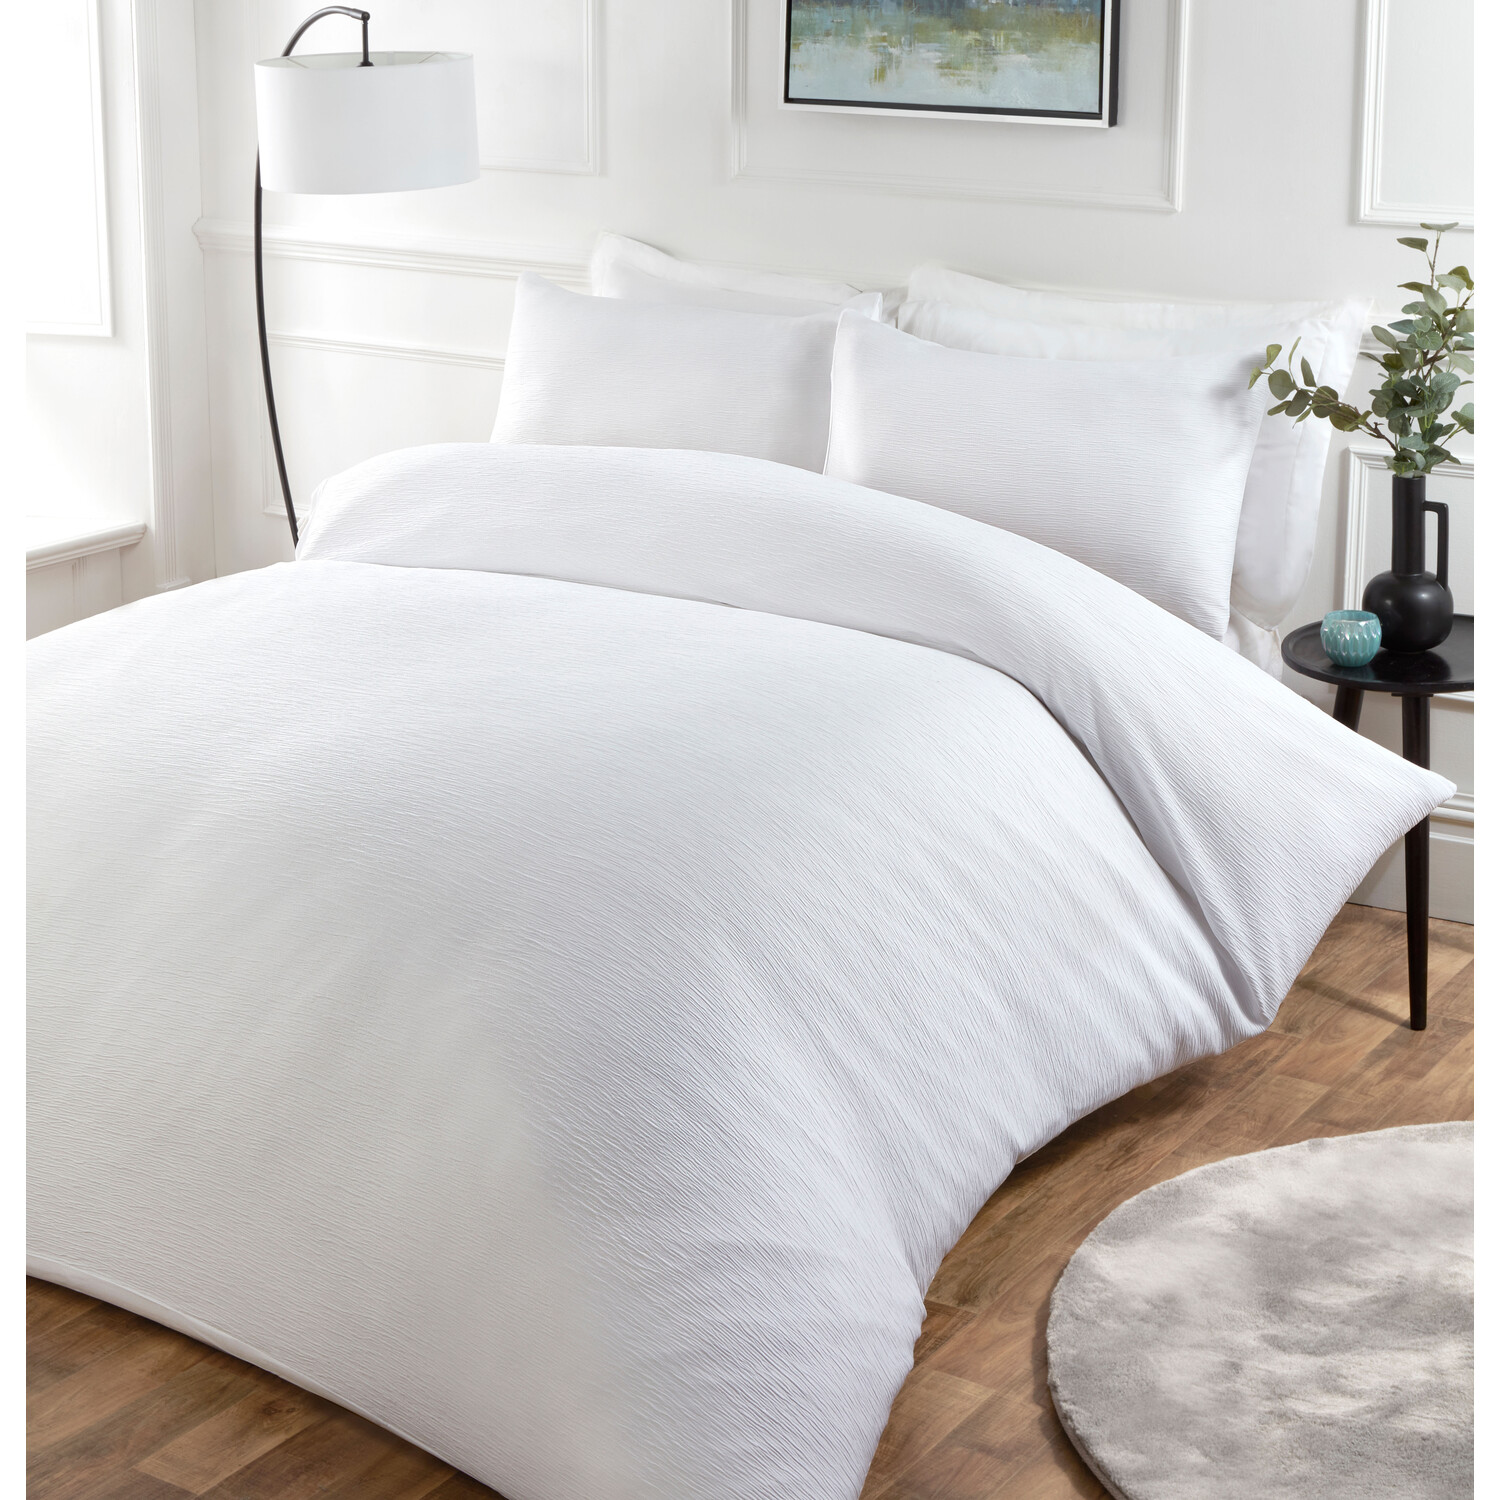 My Home Milan Double White Textured Duvet Cover Set Image 2